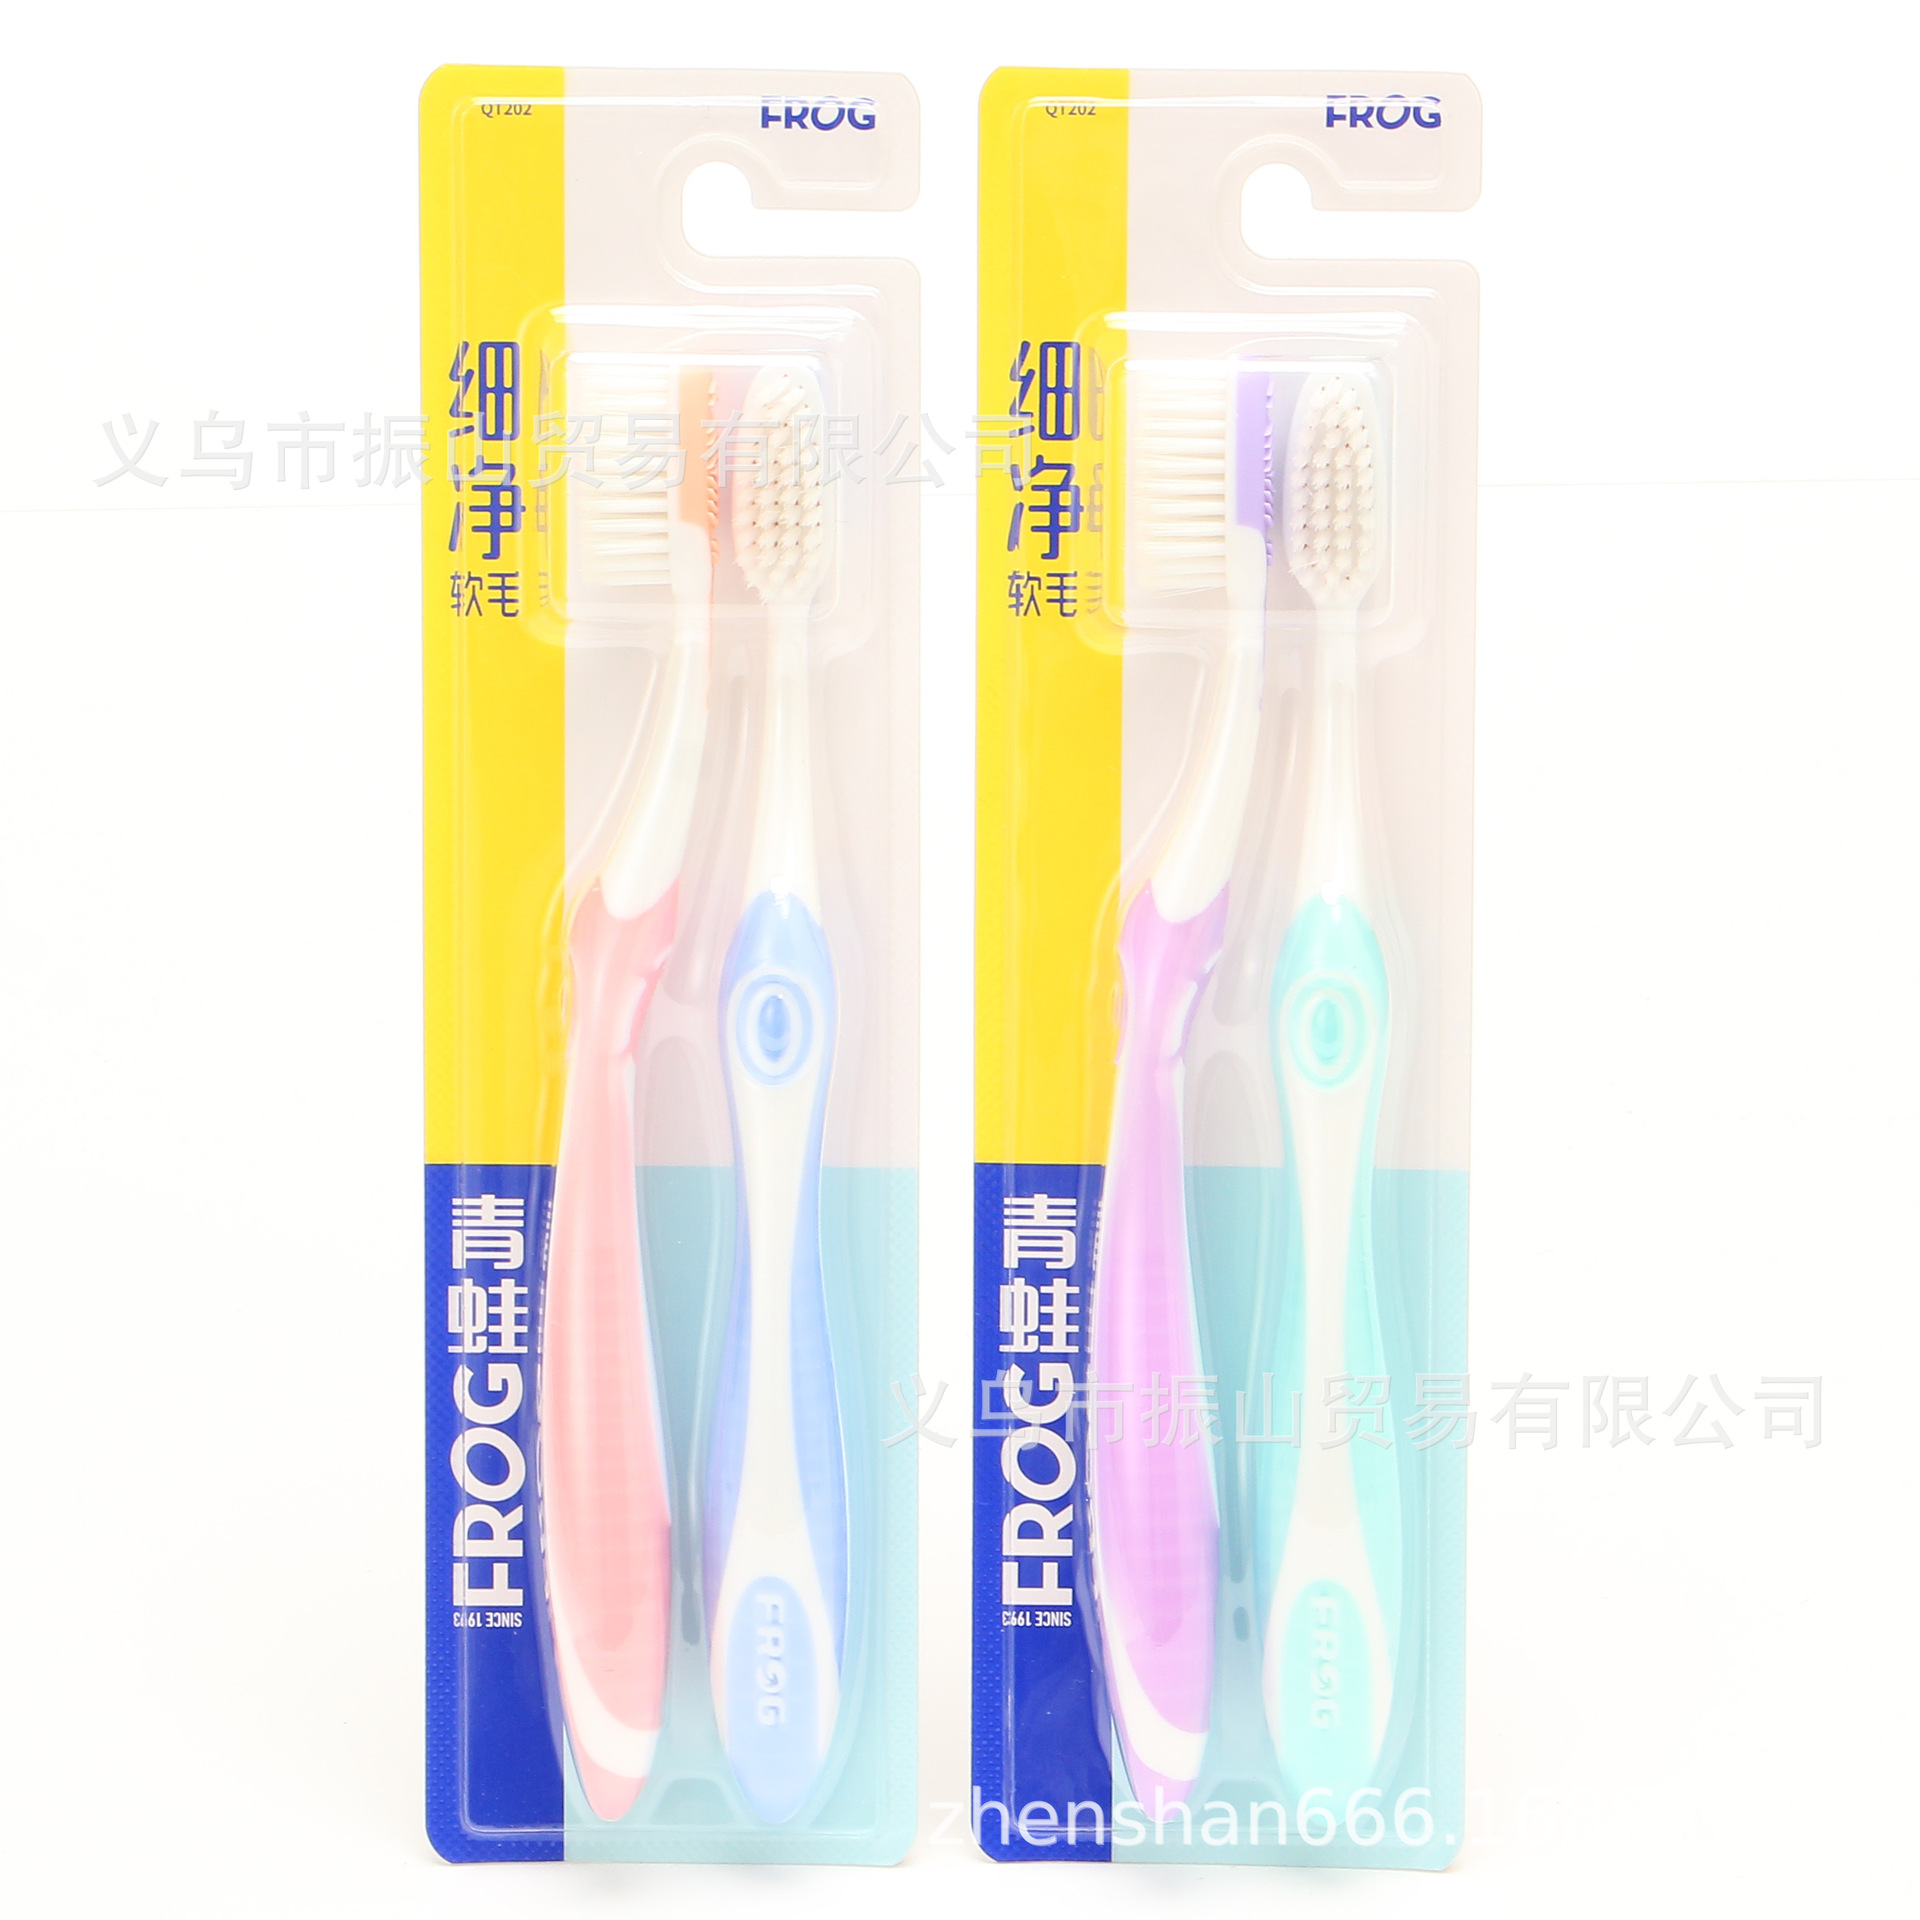 frog 202 pack of two bottles classic product ergonomics toothbrush handle soft glue cleaning teeth ultra-fine soft-bristle toothbrush